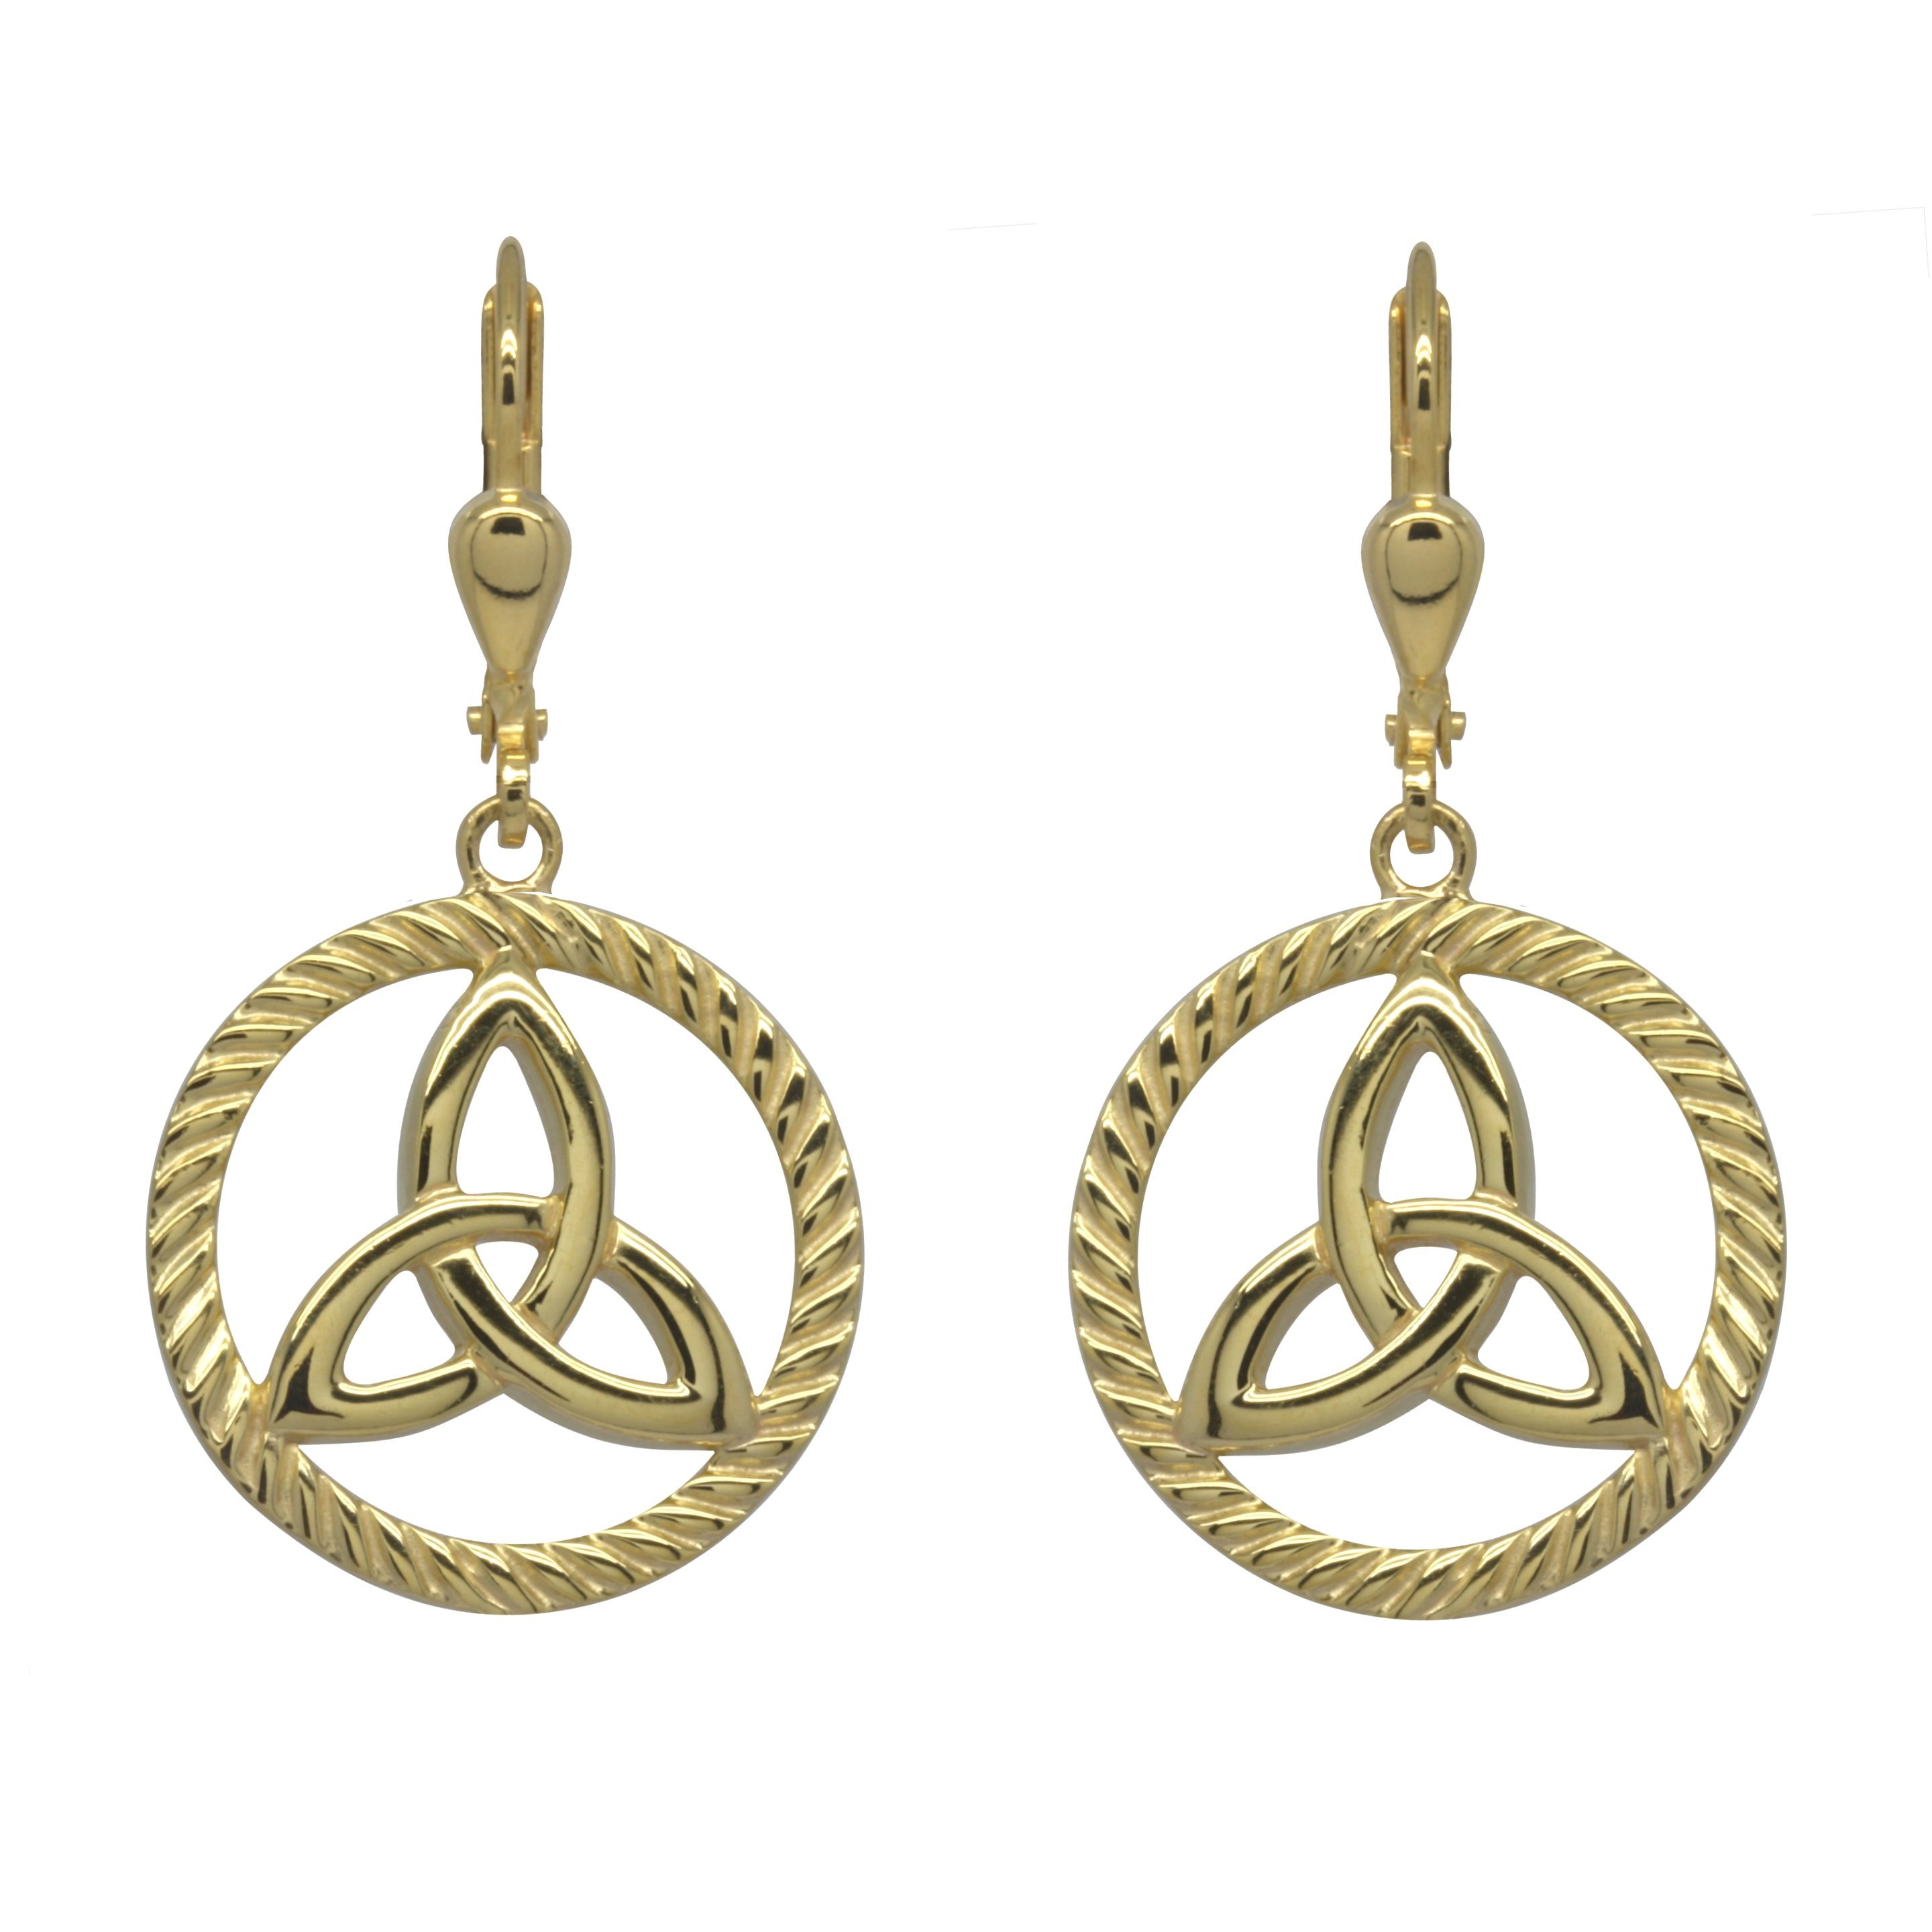 Product image for Irish Earrings | Gold Plated Sterling Silver Round Trinity Knot Earrings